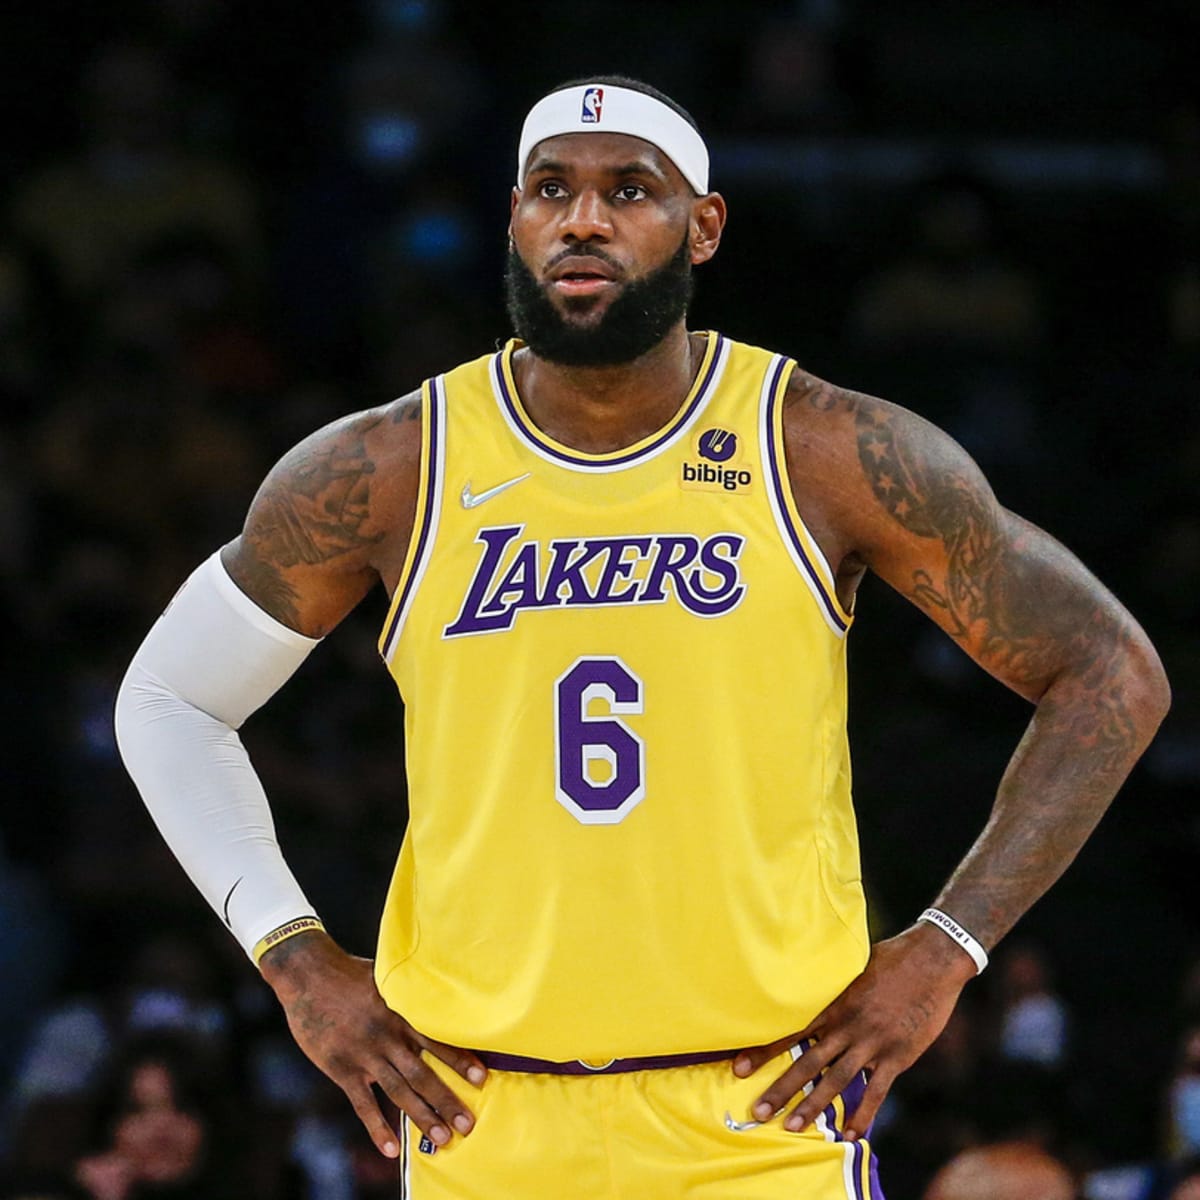 LeBron James carries a $41,000 bag. Here's your chance to get into